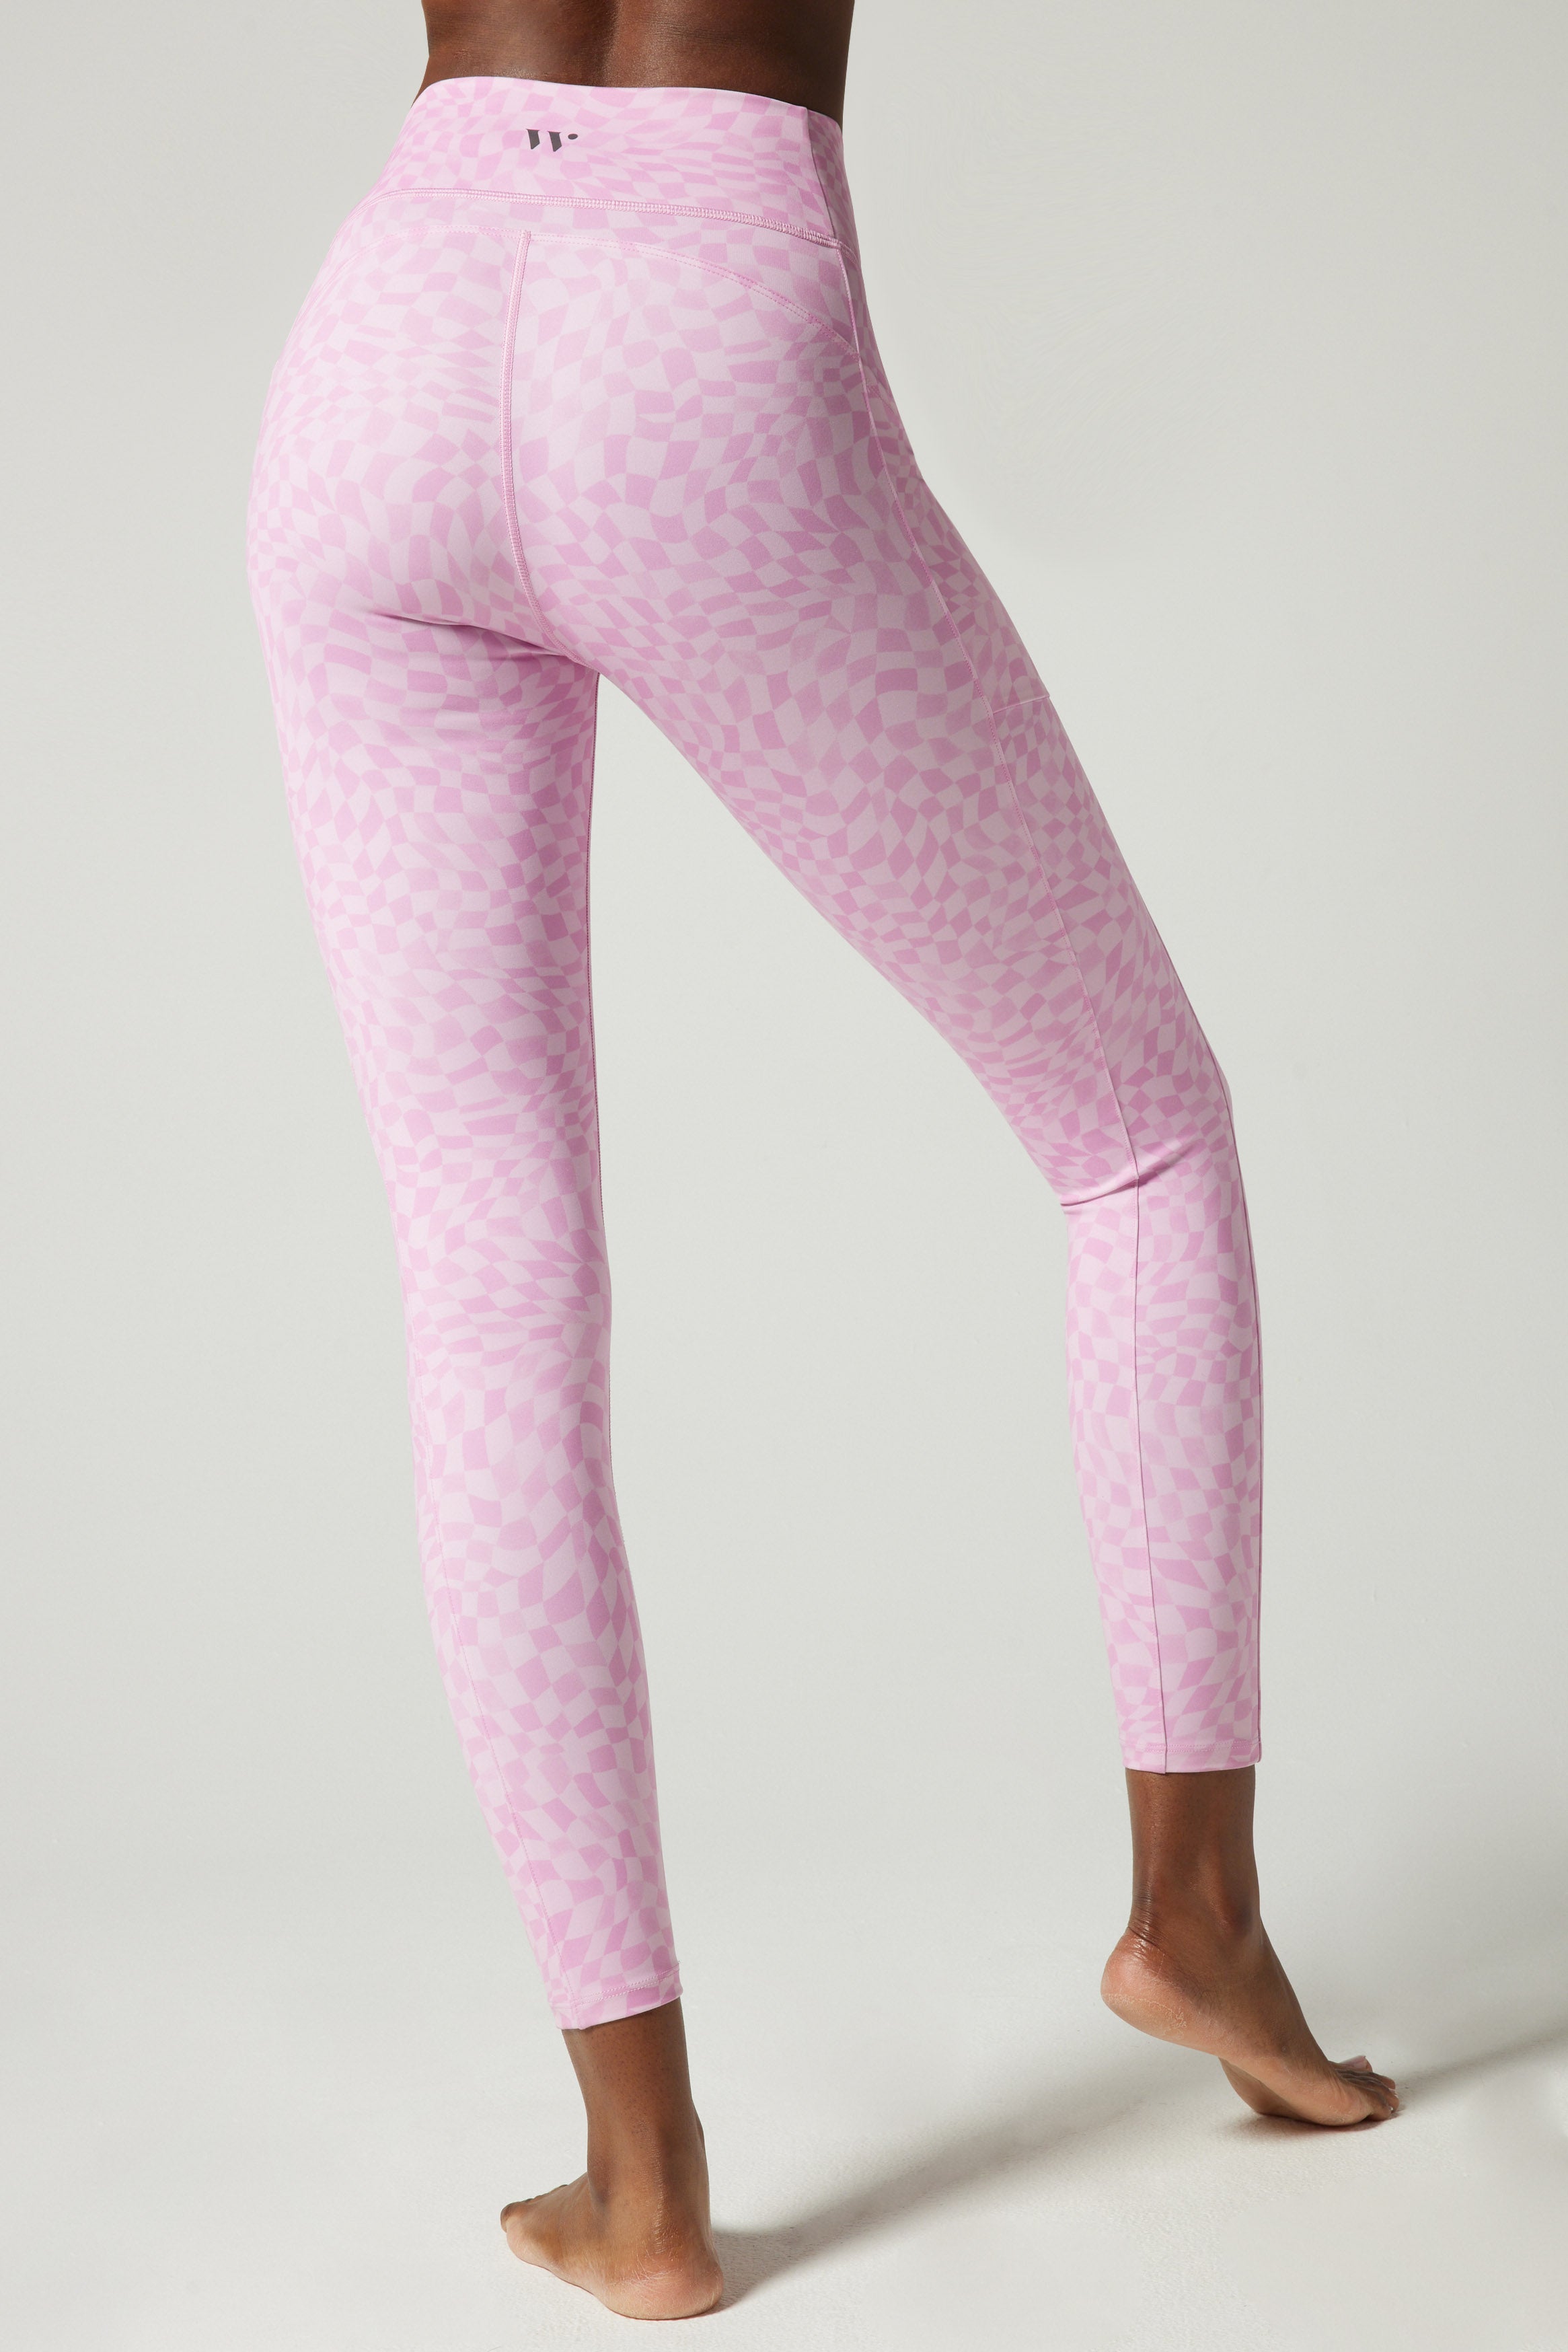 Remi Pocket Legging Check Wave Blossom – Wear It To Heart